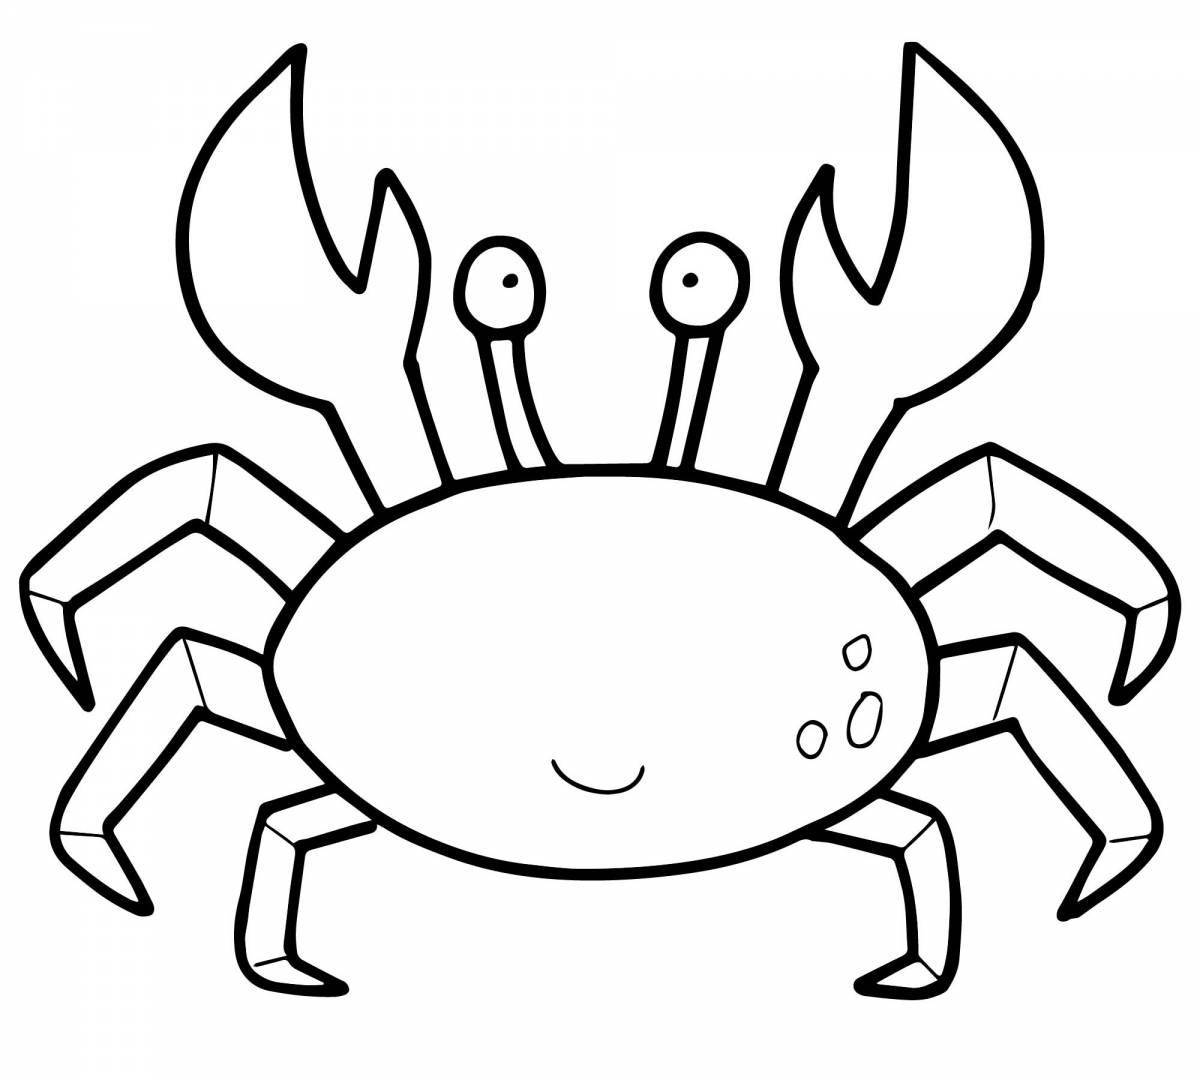 Crab for kids #11